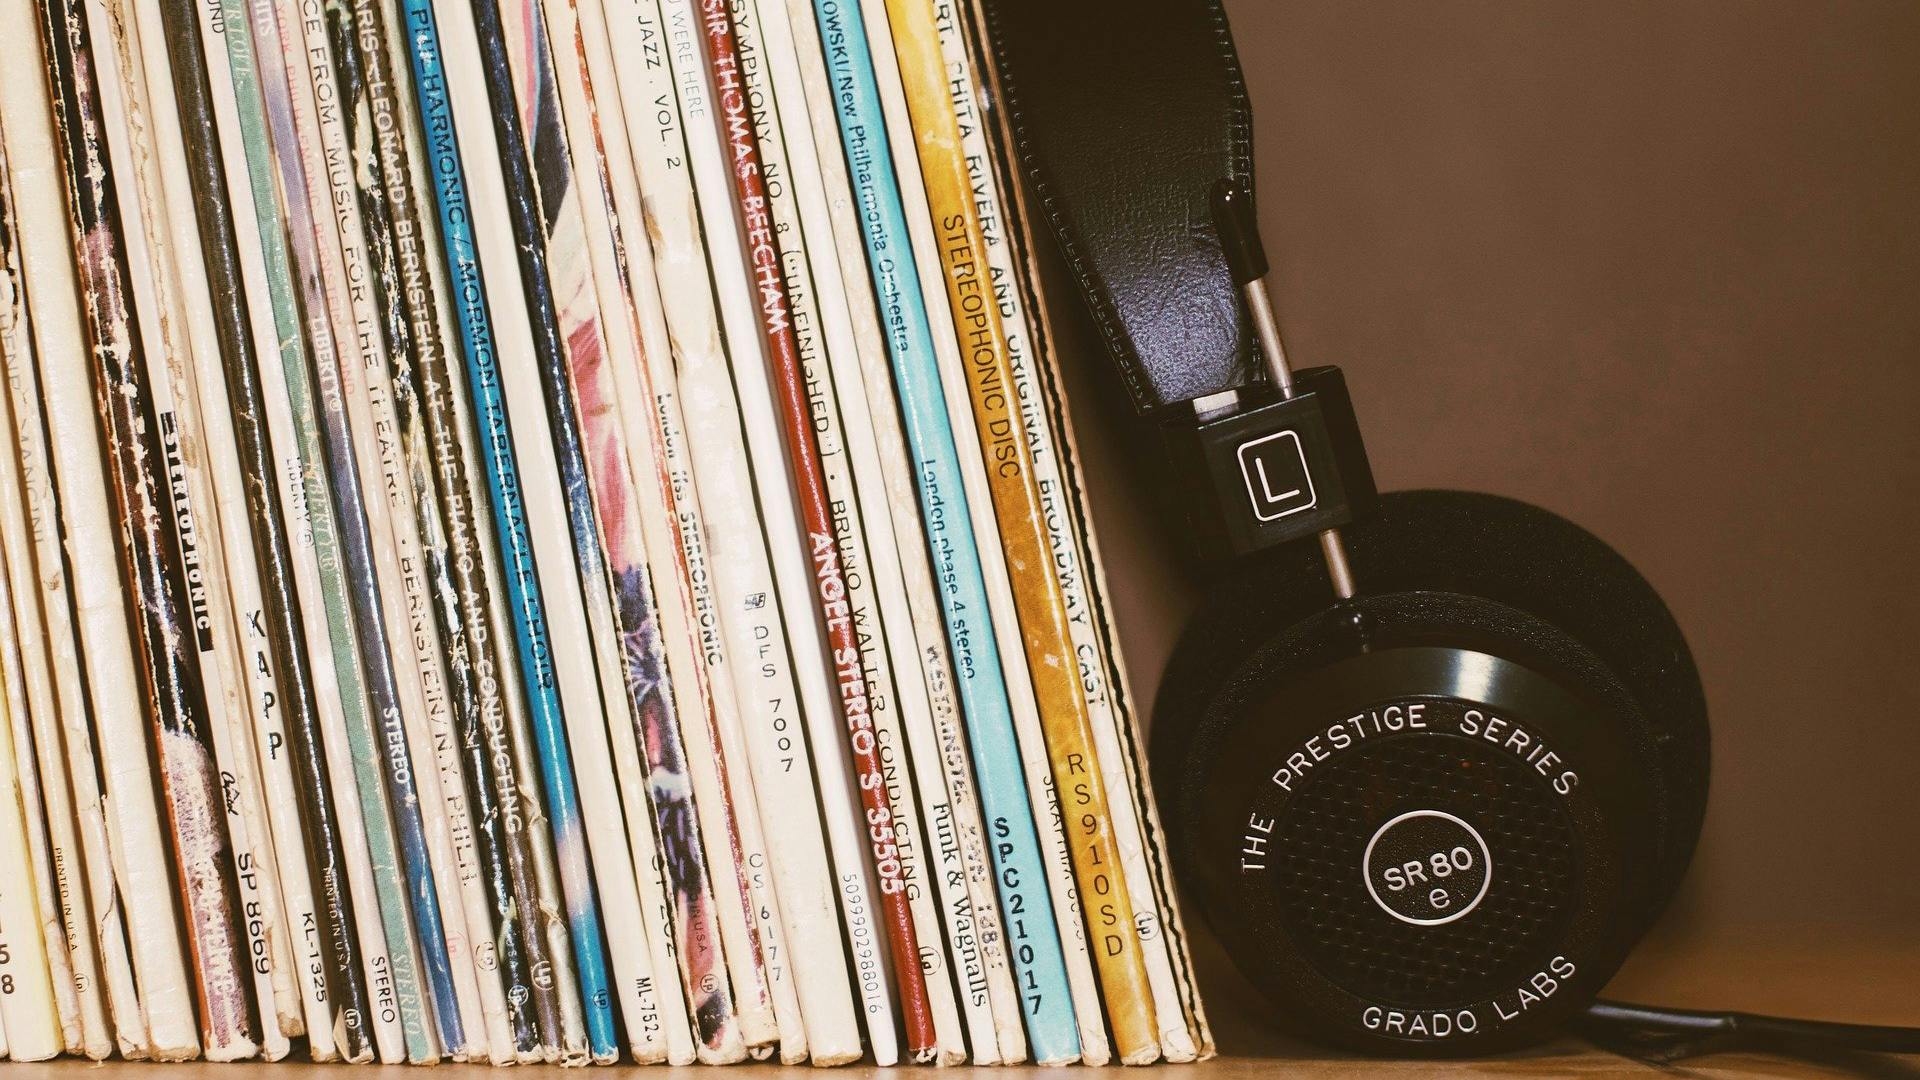 15 Of The Best Albums To Listen To On Headphones